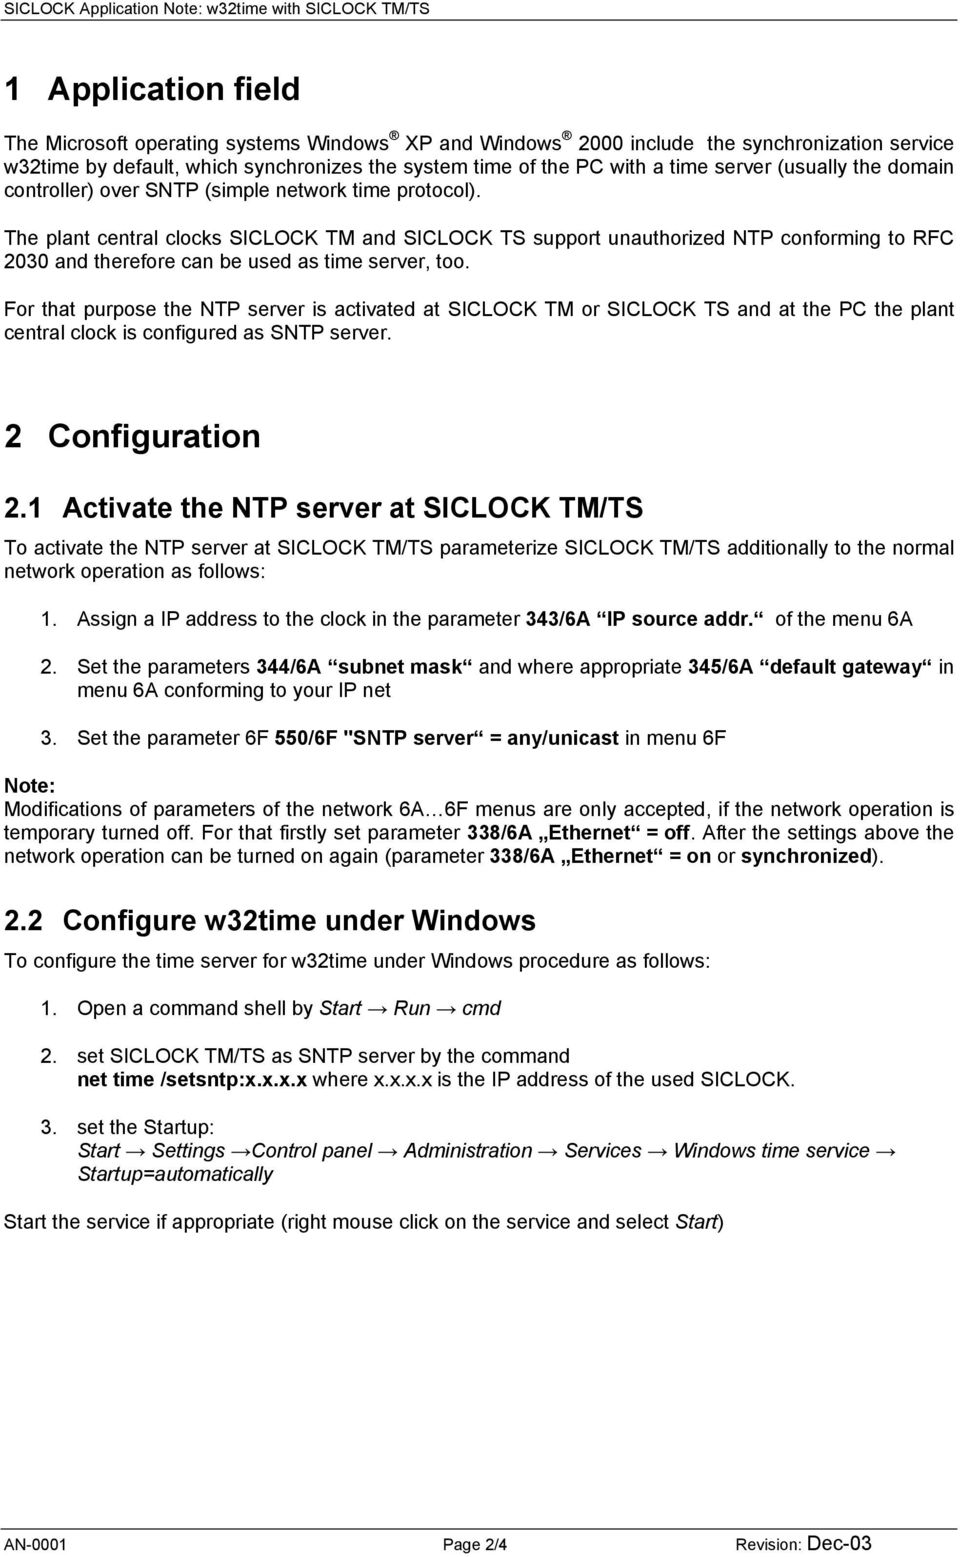 The plant central clocks SICLOCK TM and SICLOCK TS support unauthorized NTP conforming to RFC 2030 and therefore can be used as time server, too.